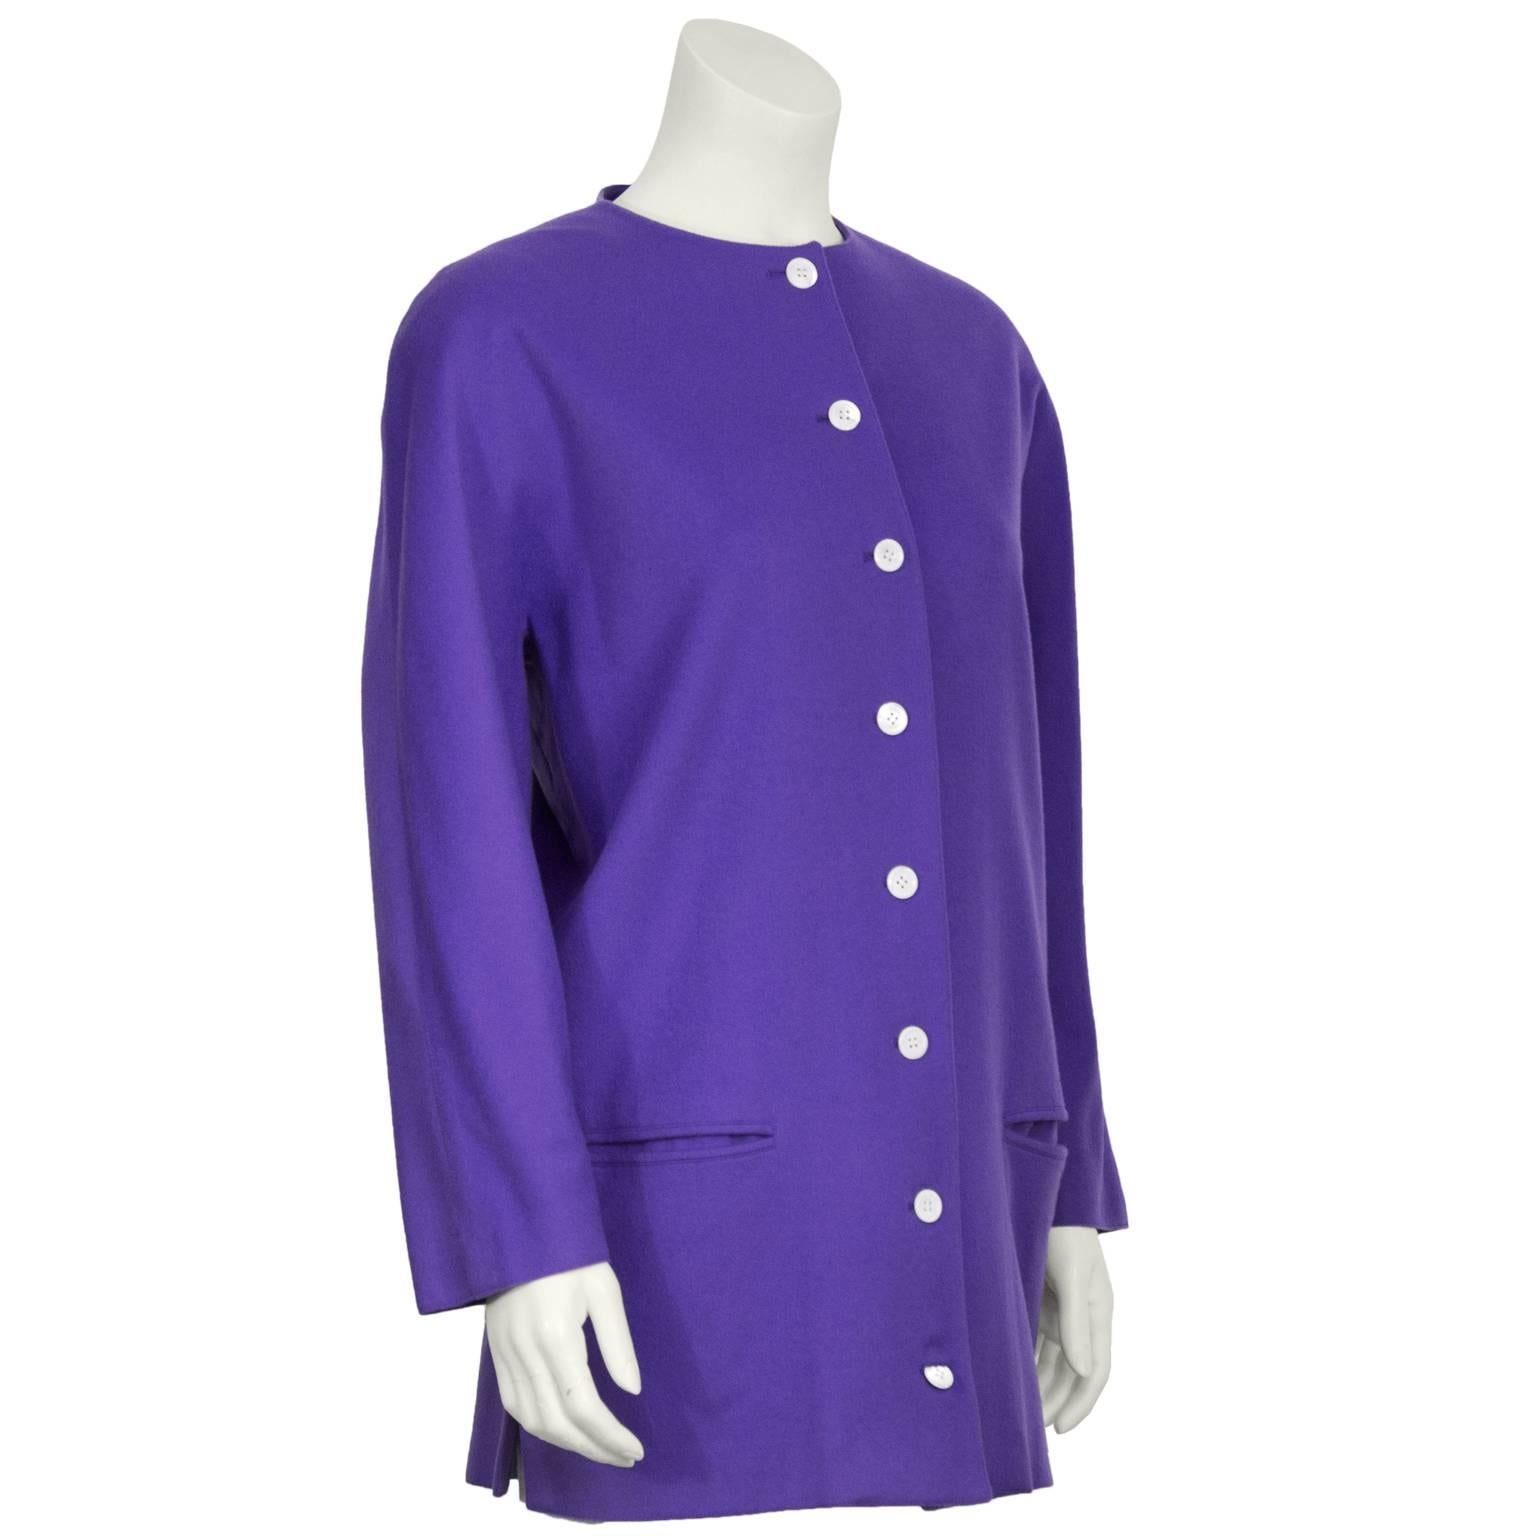 Genny purple wool button front jacket with front slit pockets. The collarless jacket features rounded shoulder pads and pearlized round buttons down the front. Fully lined. In excellent condition. Fits like a US 6.